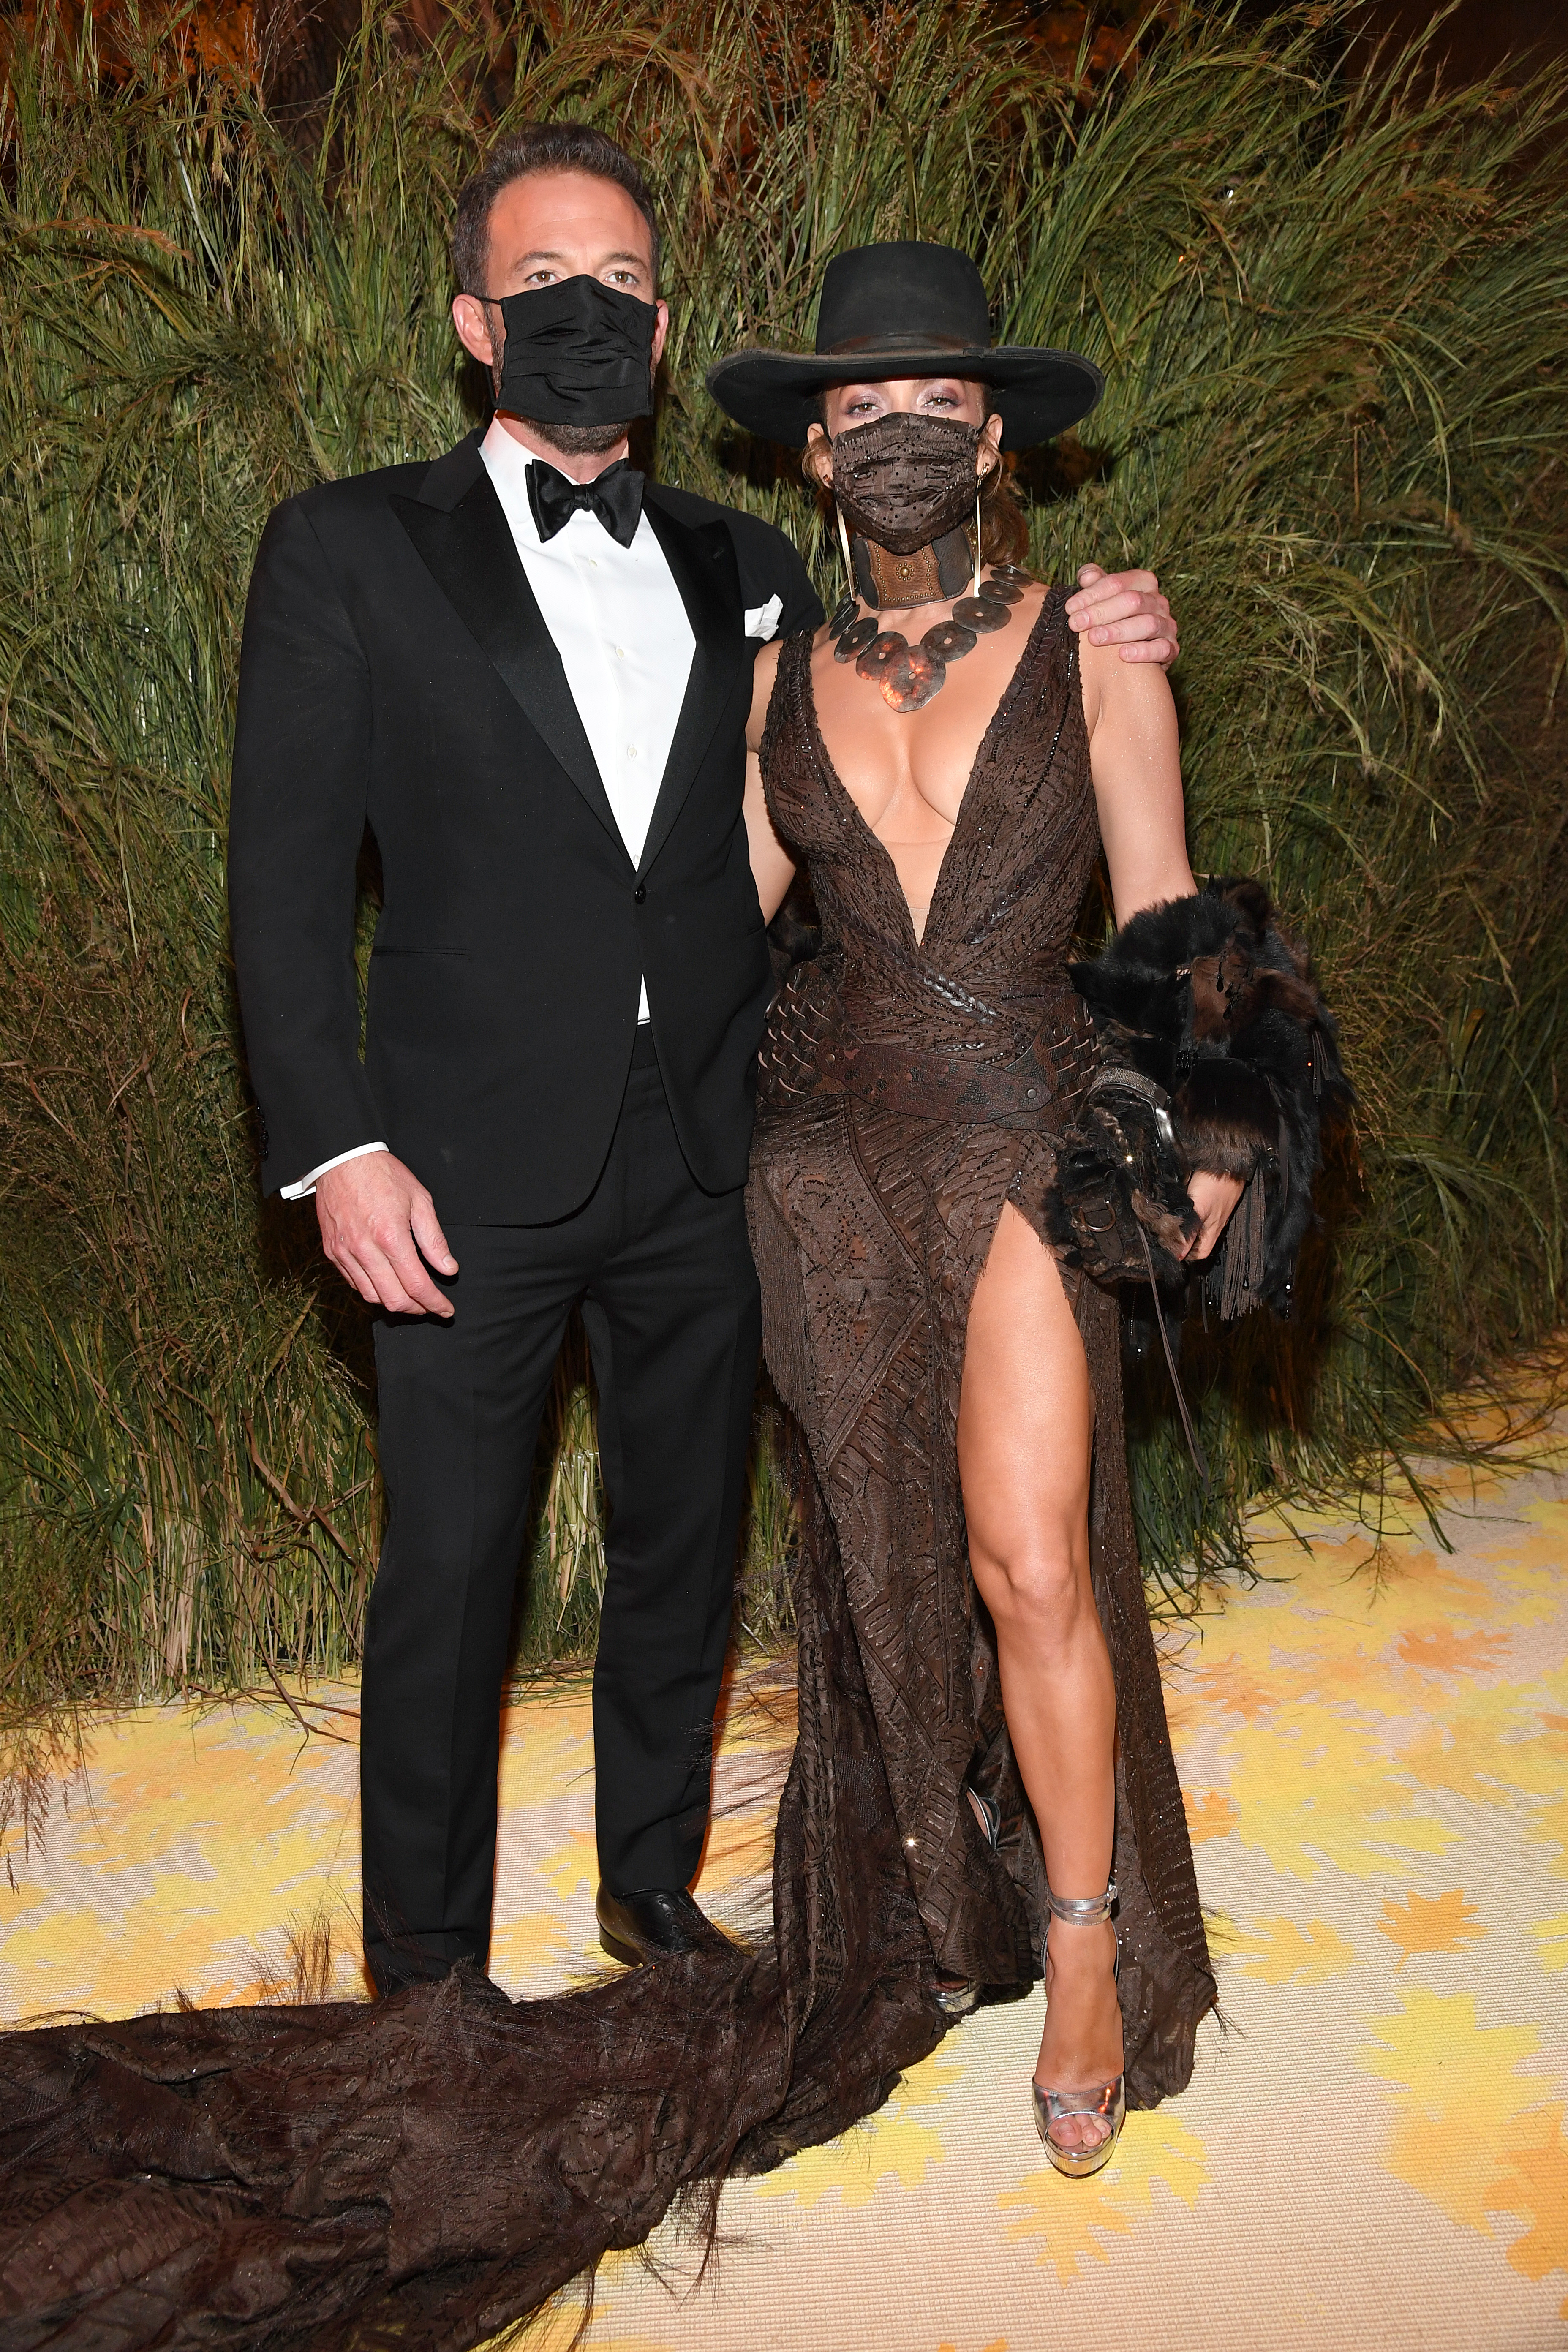 Ben Affleck and Jennifer Lopez at the 2021 Met Gala "Celebrating In America: A Lexicon of Fashion" in New York City on September 13, 2021 | Source: Getty Images